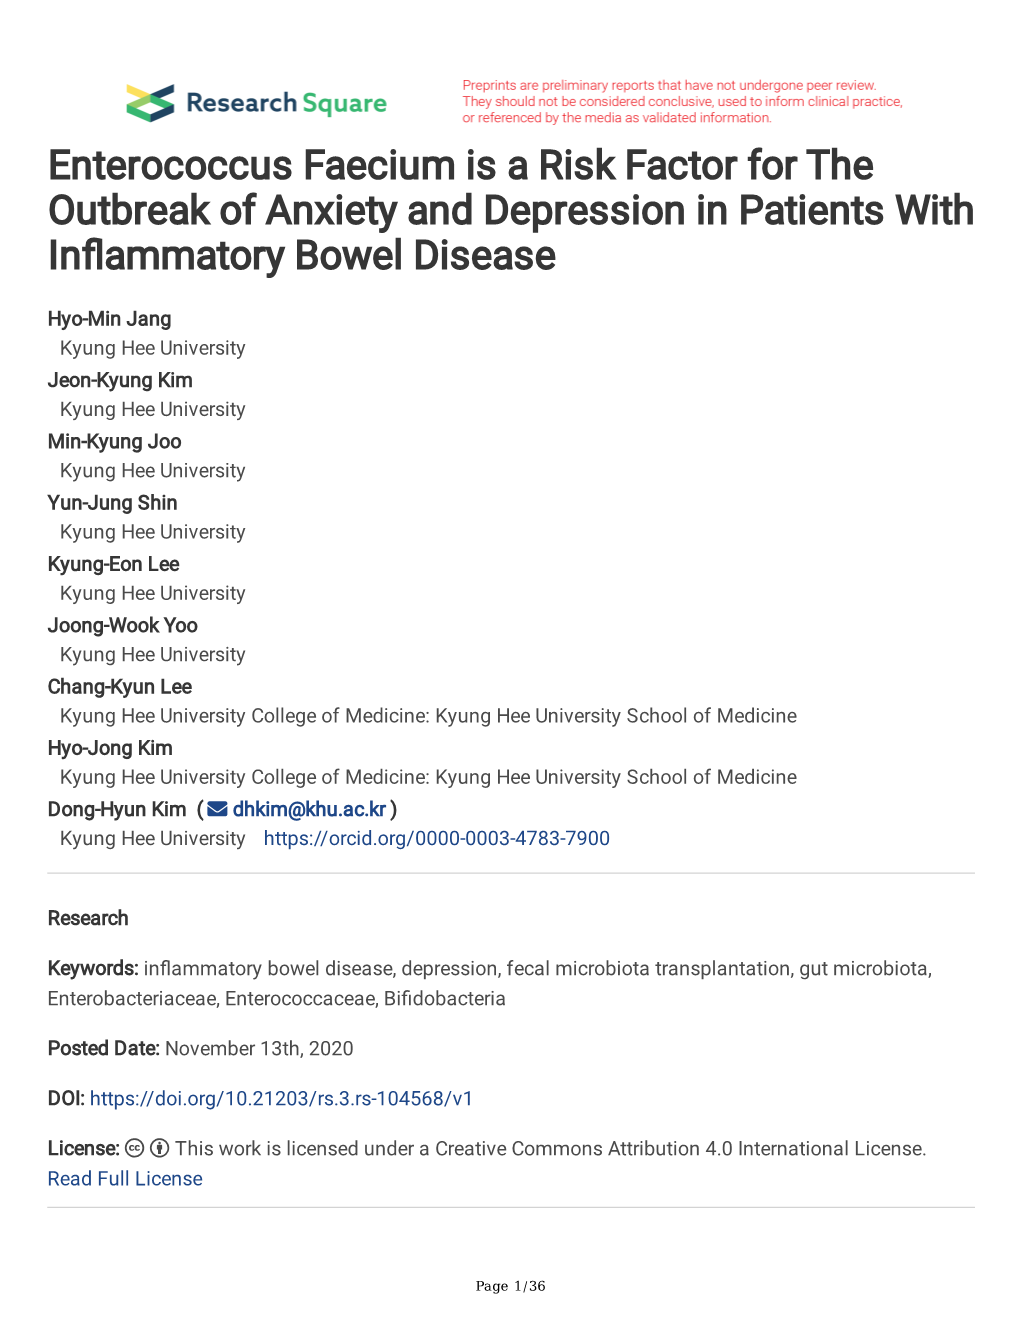 Enterococcus Faecium Is a Risk Factor for the Outbreak of Anxiety and Depression in Patients with Infammatory Bowel Disease